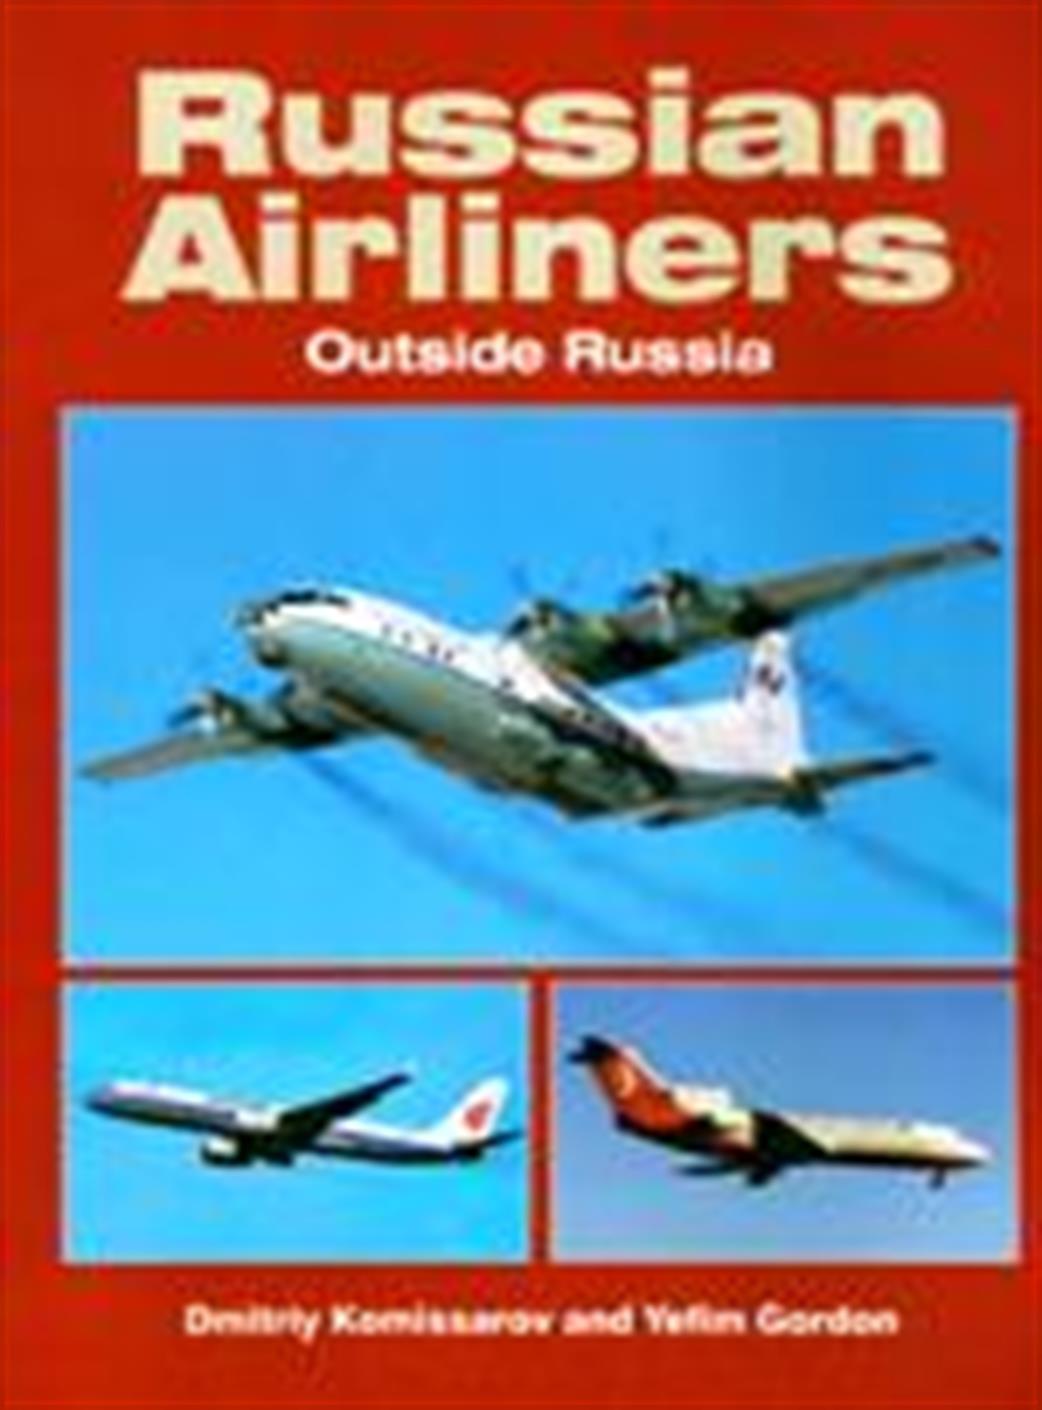 Pen & Sword  9781857802528 Russian Airliners Outside Russia